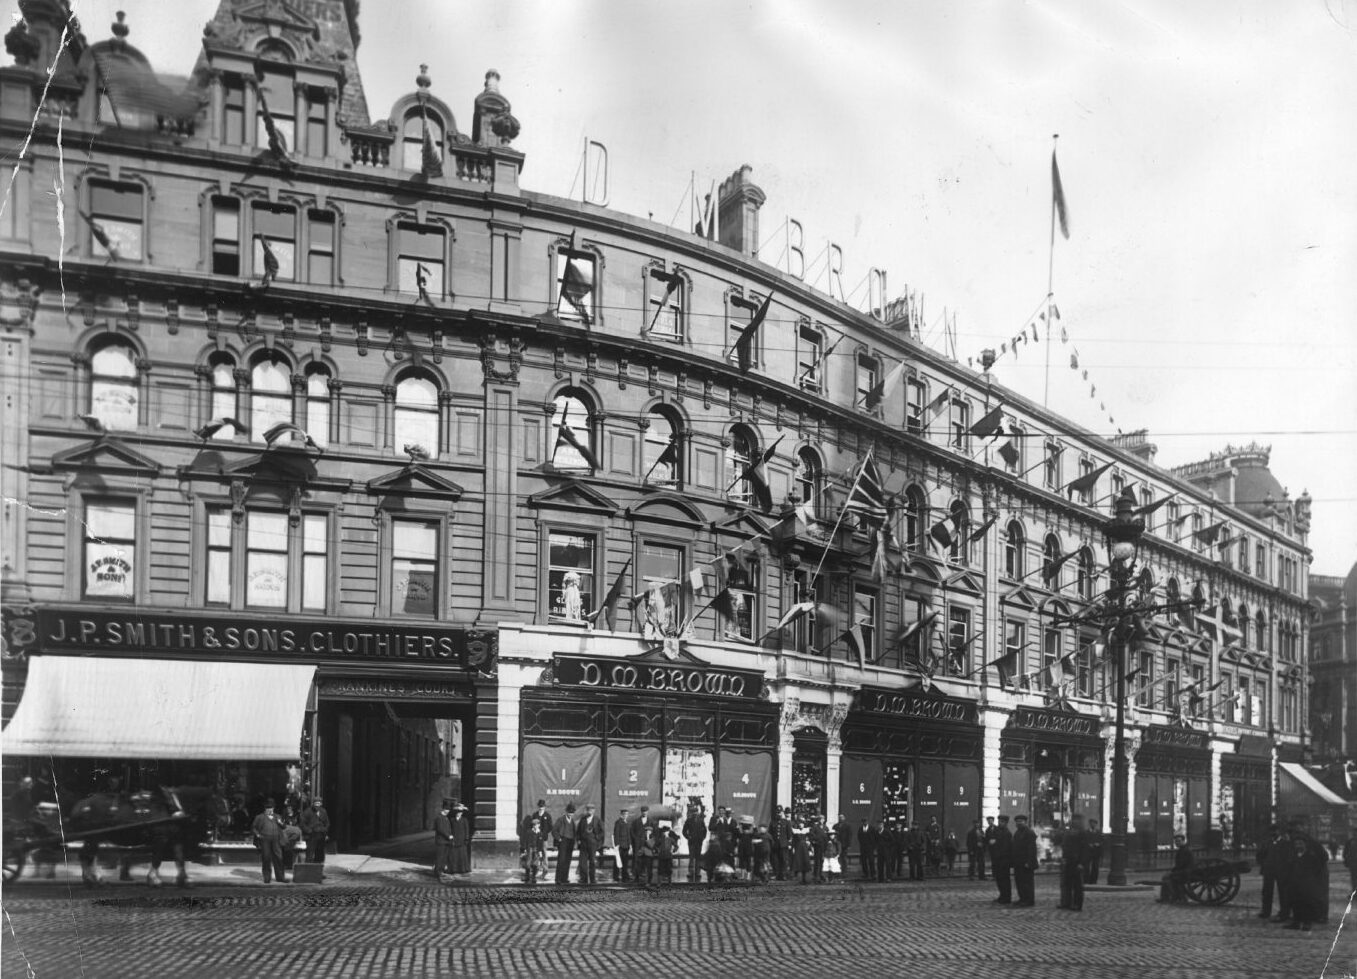 D. M. Brown’s in August 1902 with bunting and Union flags for the coronation of Edward VII